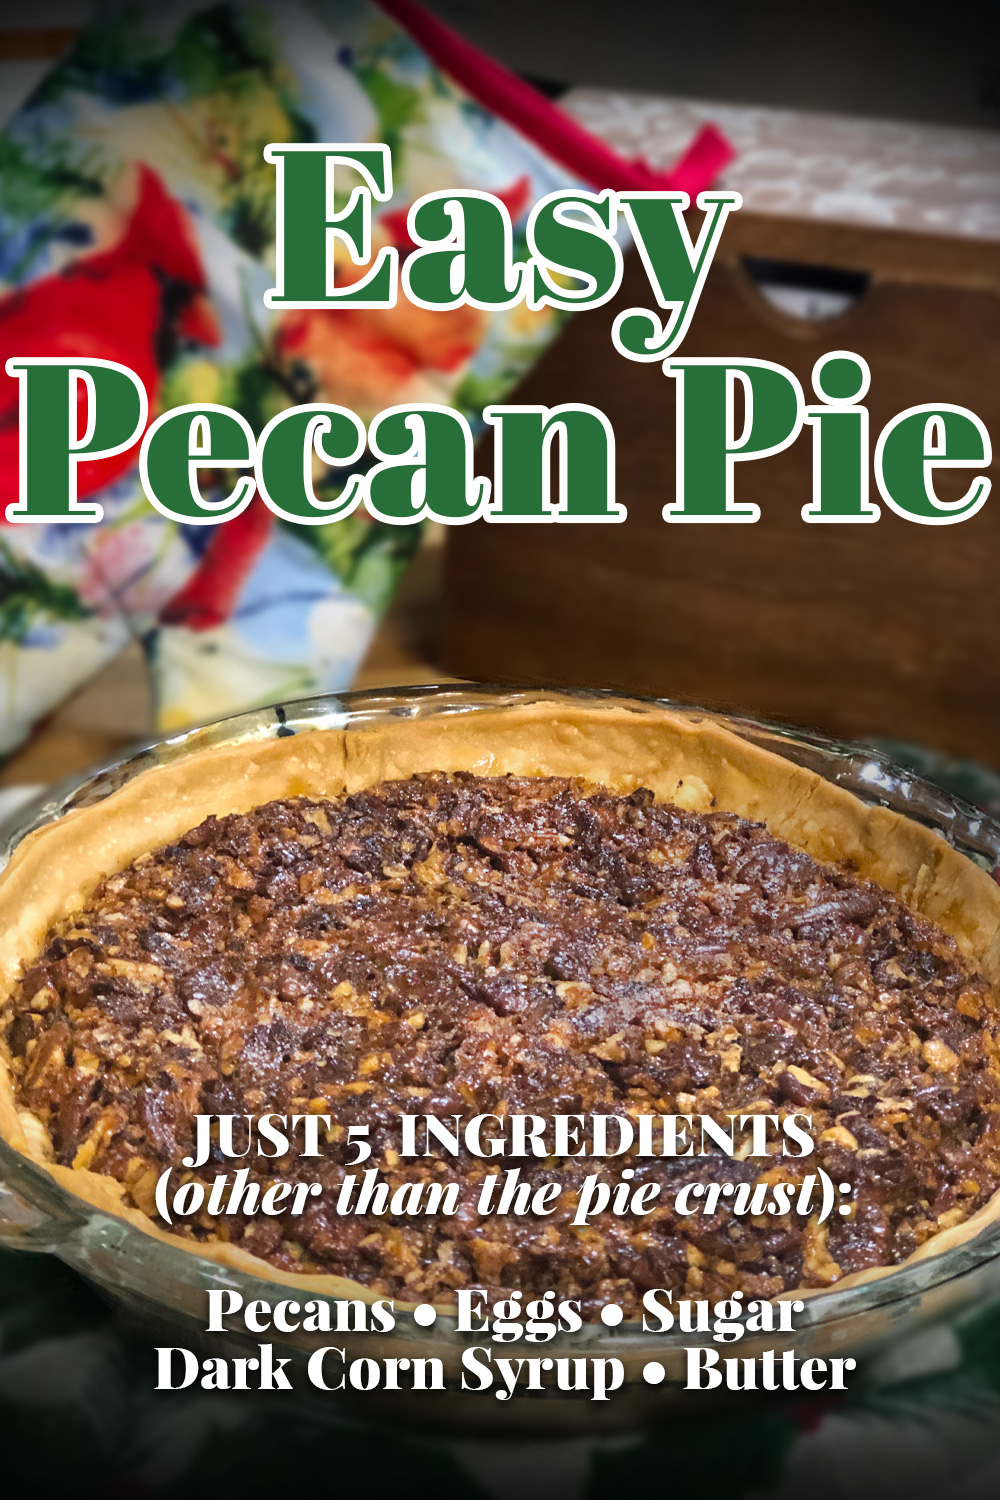 How to make traditional, Southern Pecan Pie from scratch